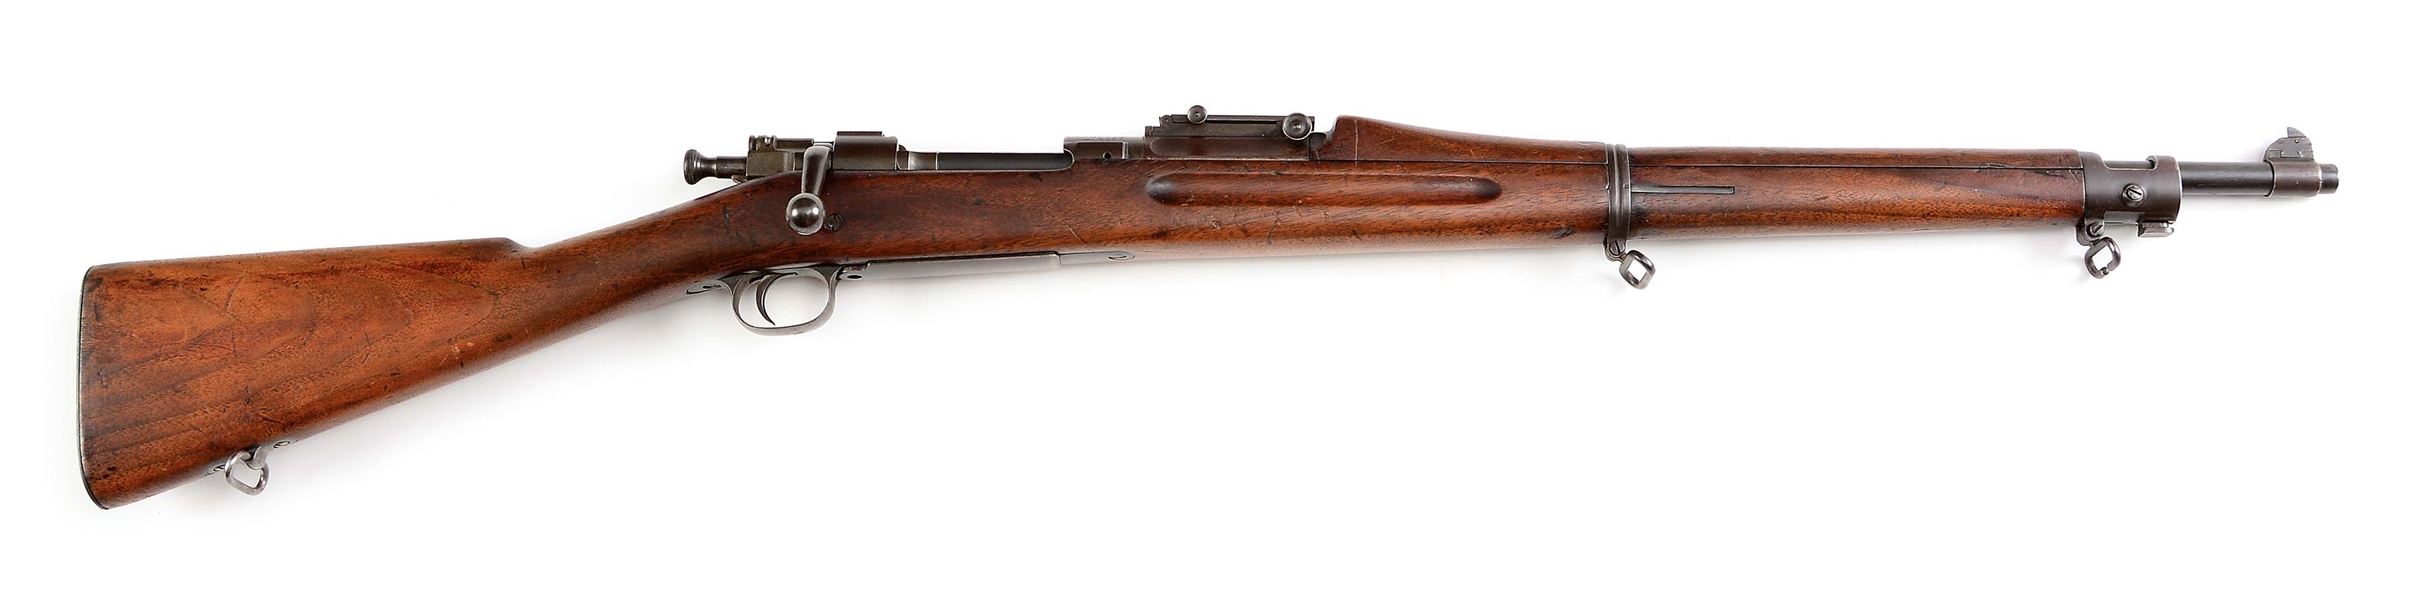 (C) SPRINGFIELD MODEL 1903 RIFLE MANUFACTURED IN 1905.